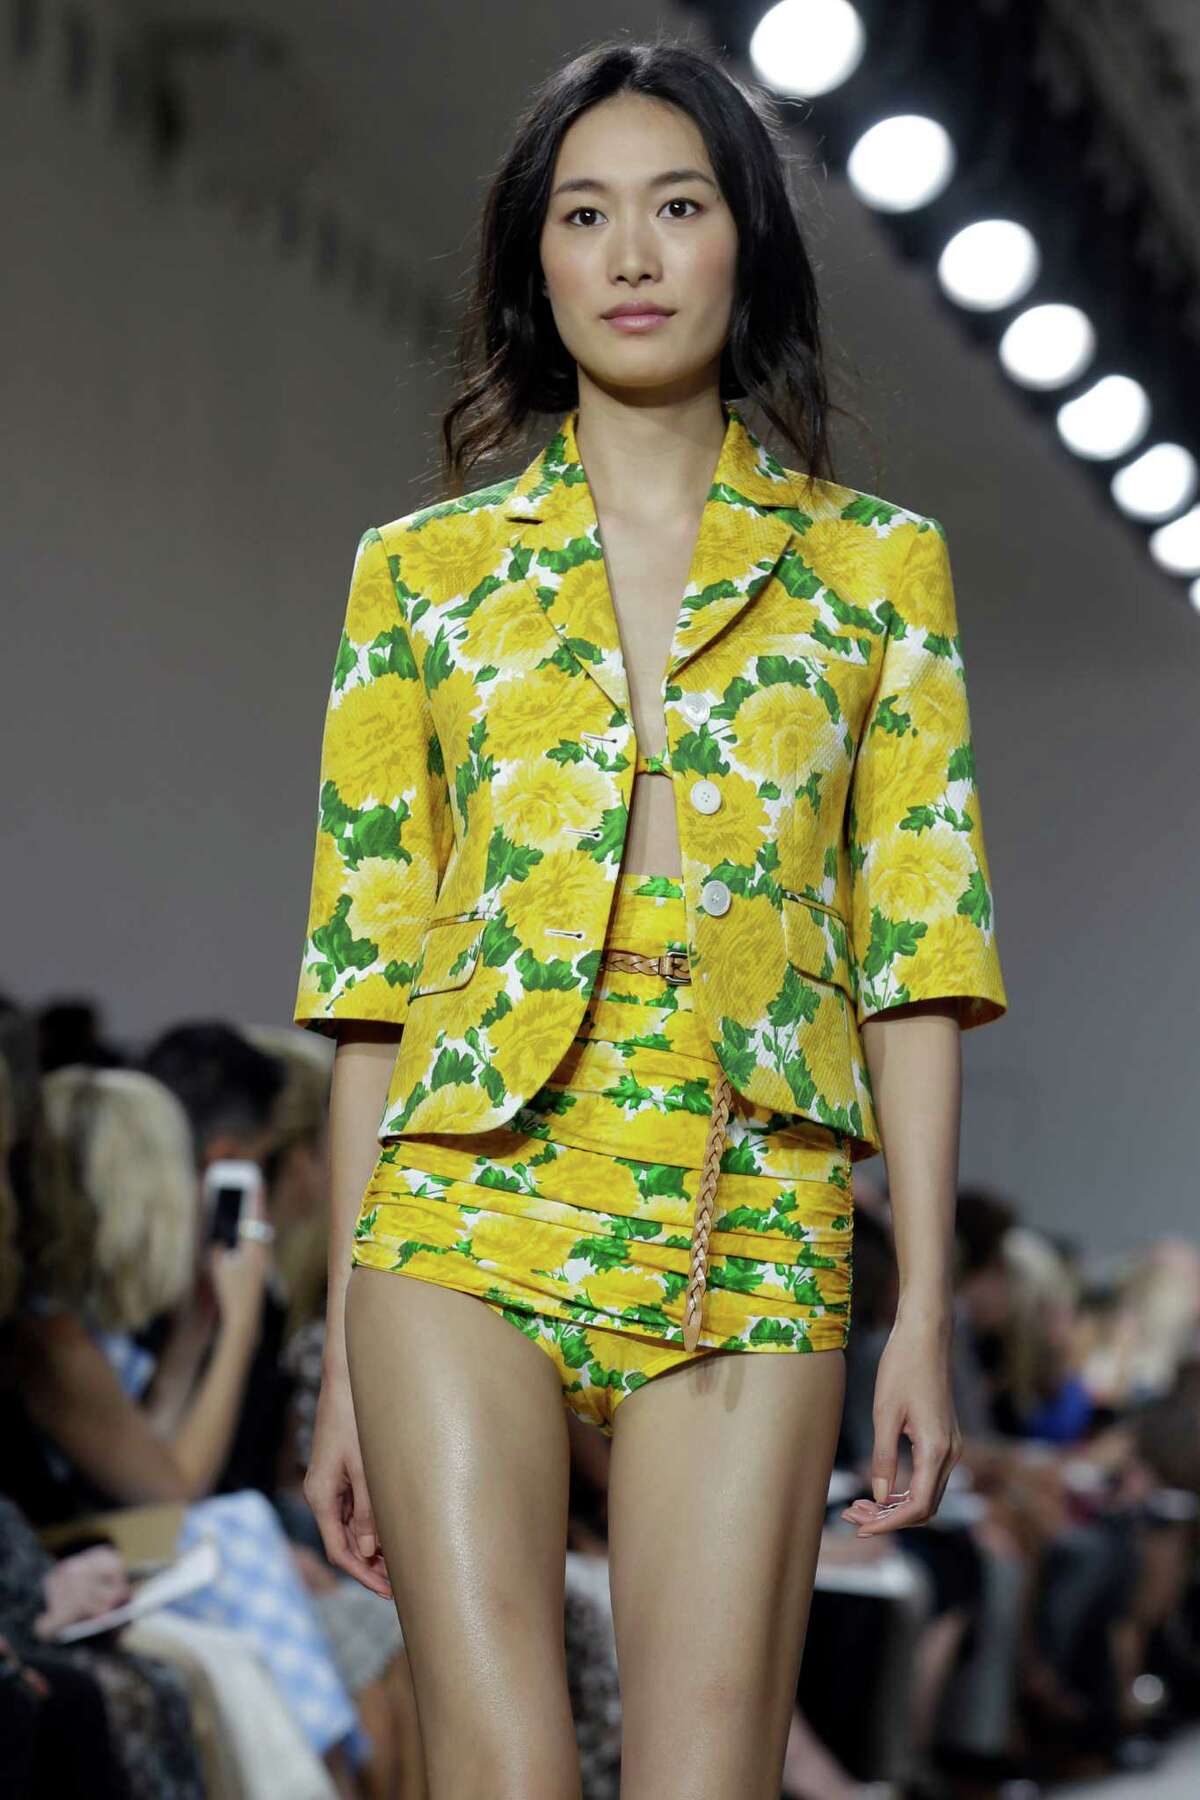 Michael Kors’ spring 2015 collection, modeled during Fashion Week in New York, had a 1950s feel.